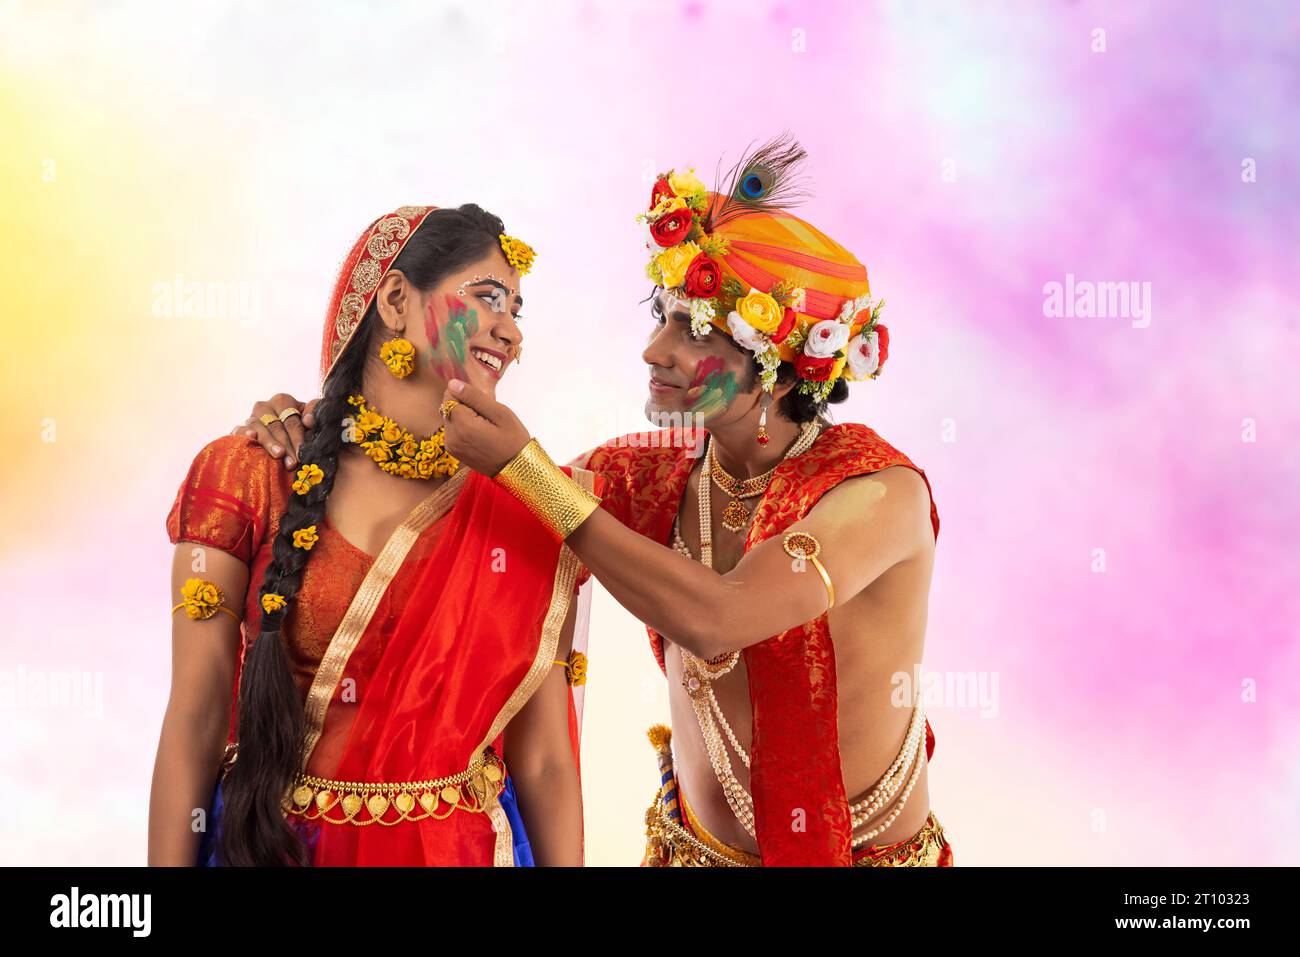 Young man and woman dressed up as Lord Radha and Krishna and playing Holi on the occasion of Janmashtami Stock Photo